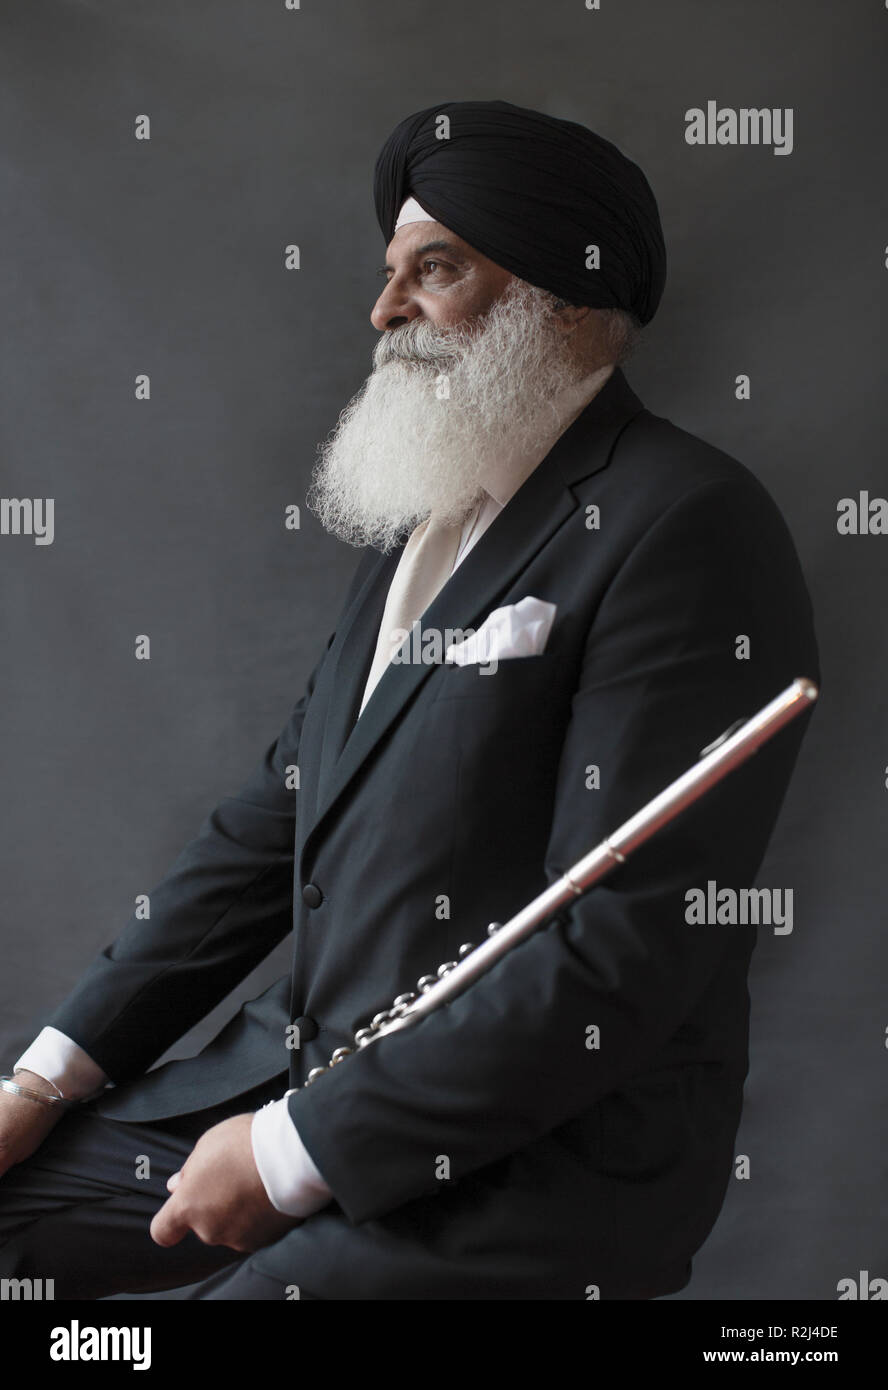 Portrait serious, well-dressed senior man in turban holding flute Stock Photo